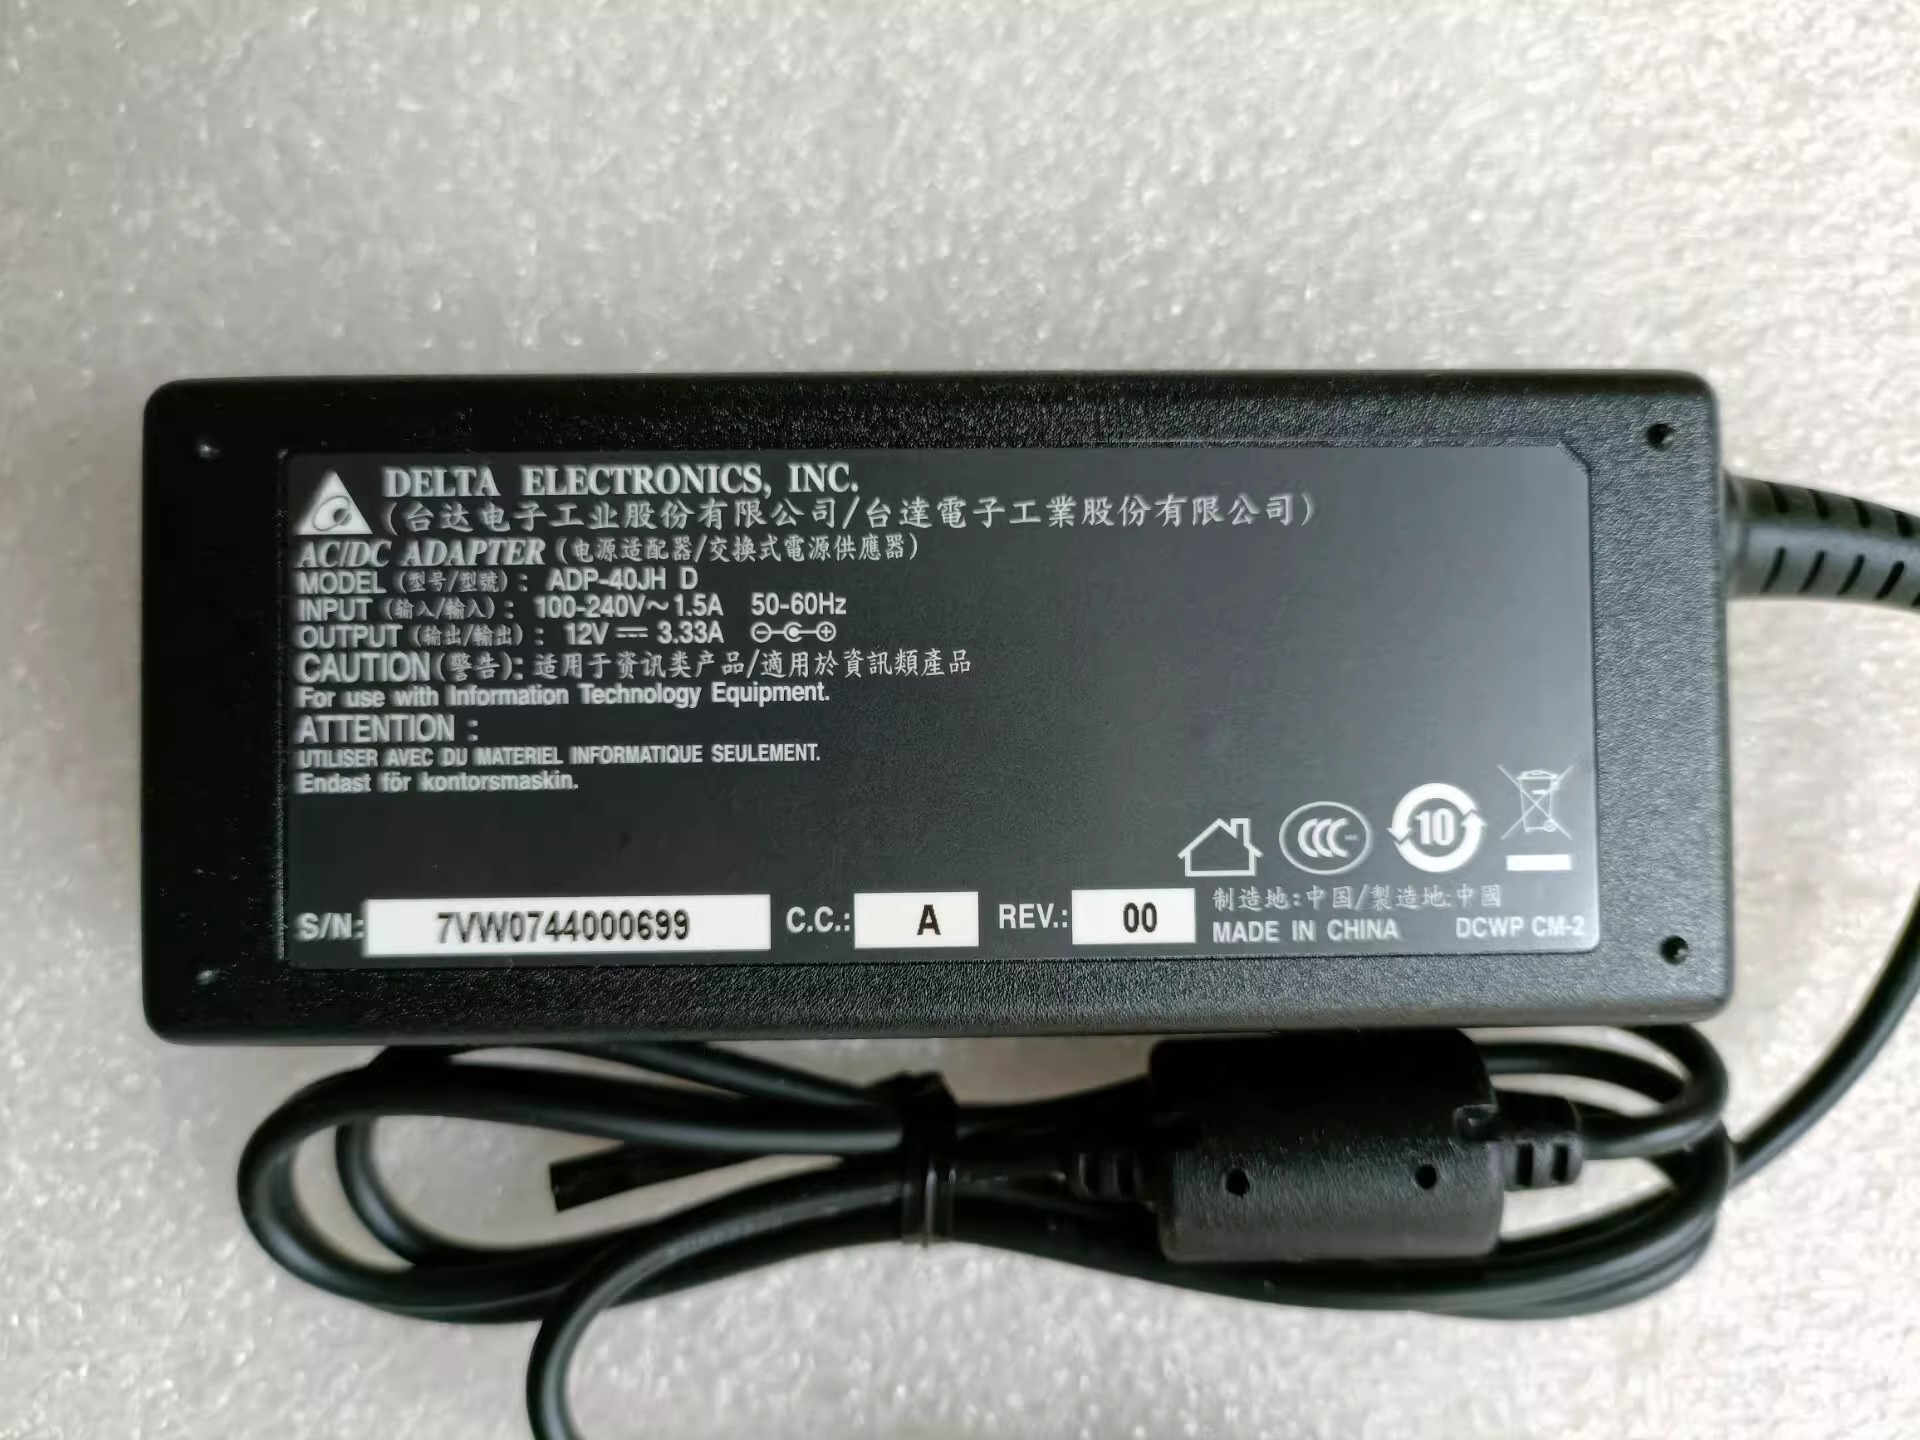 *Brand NEW*ADP-40JH D DELTA 12V 3.33A AC DC ADAPTHE POWER Supply